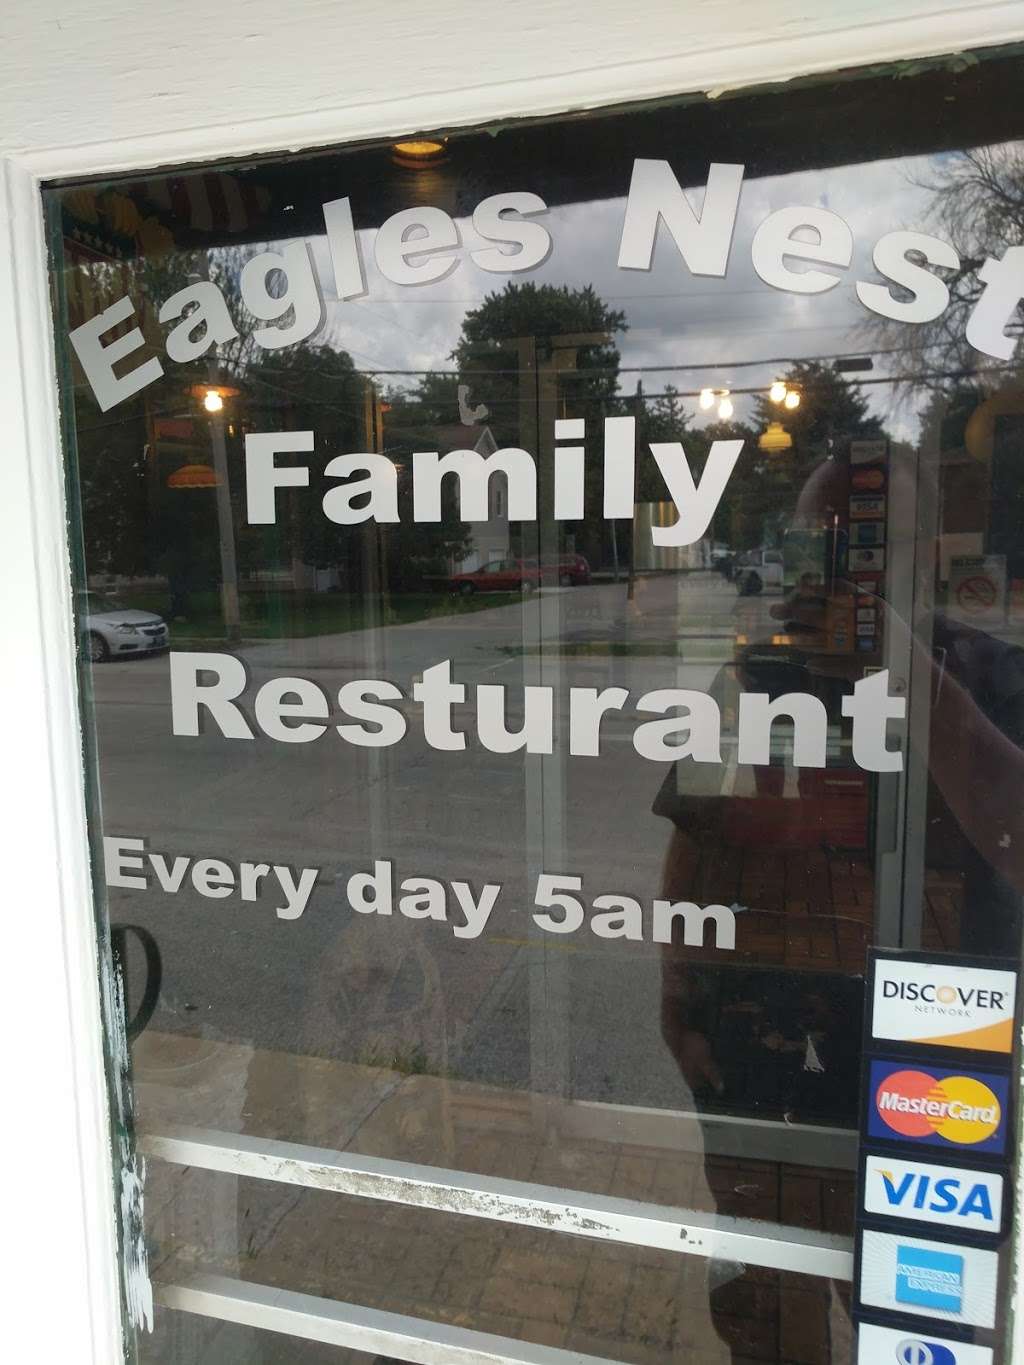 Eagles Nest Restaurant | 202 N 2700 East Rd, Forrest, IL 61741 | Phone: (815) 657-7084